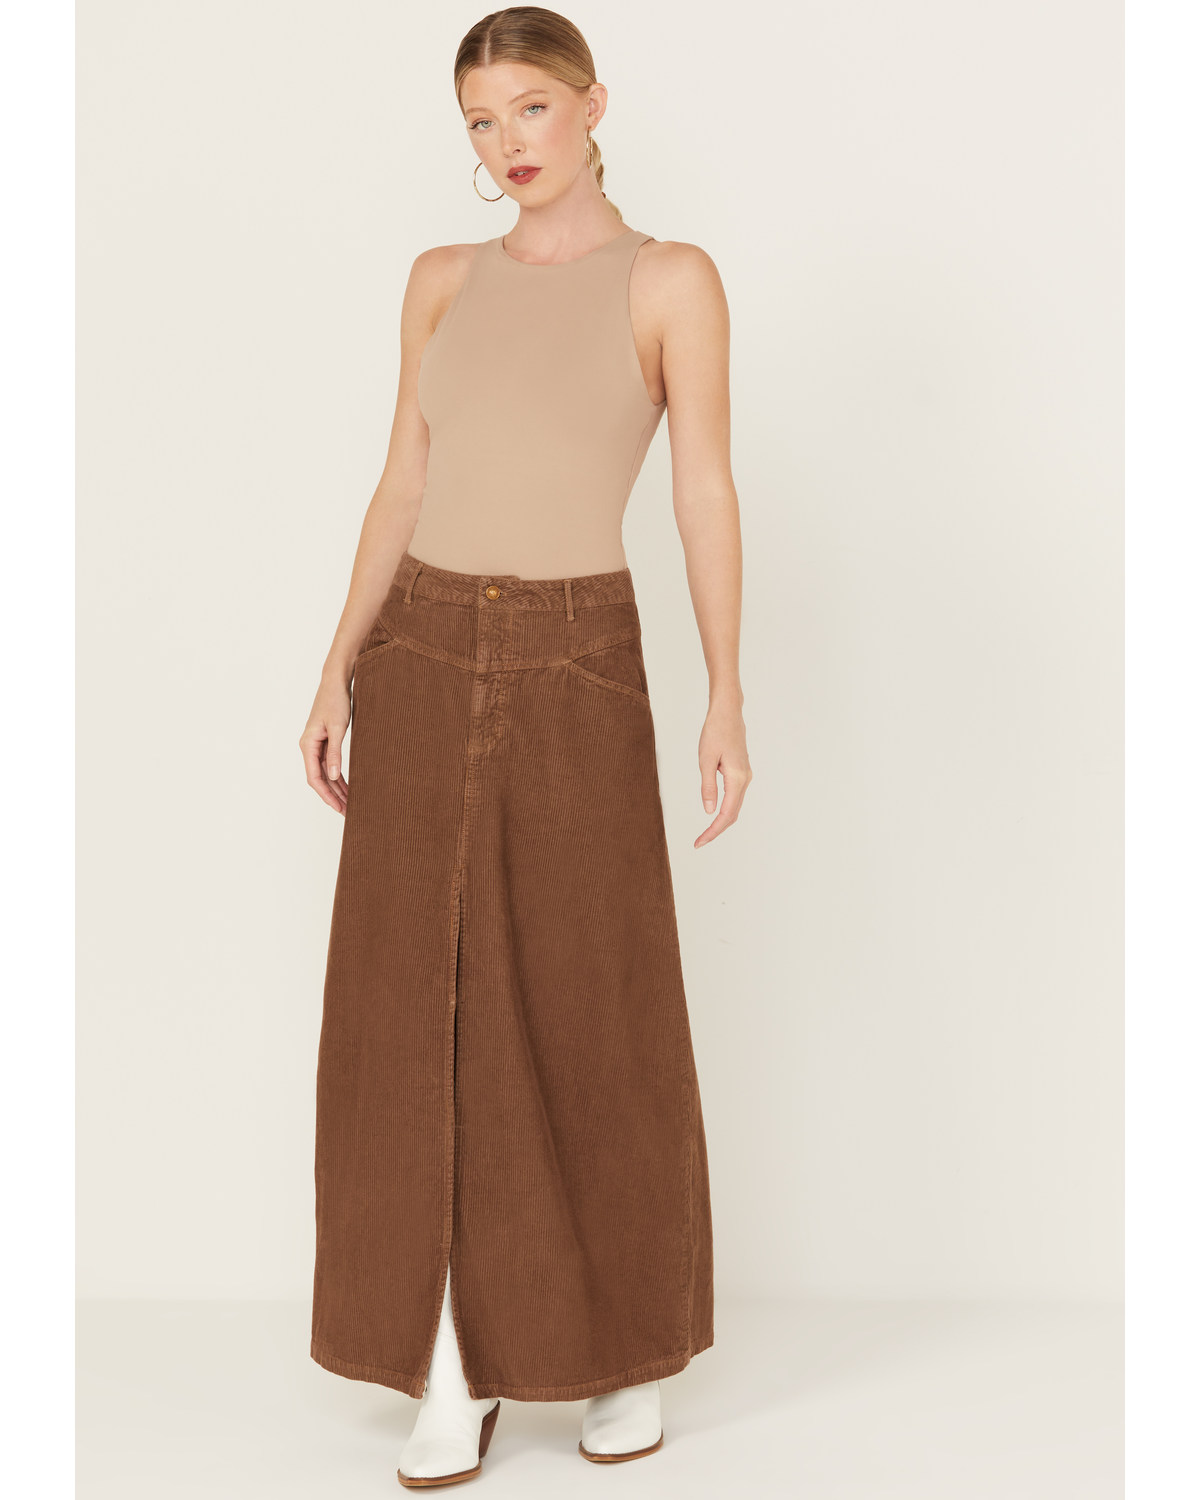 Free People Women's Come As You Are Corduroy Maxi Skirt